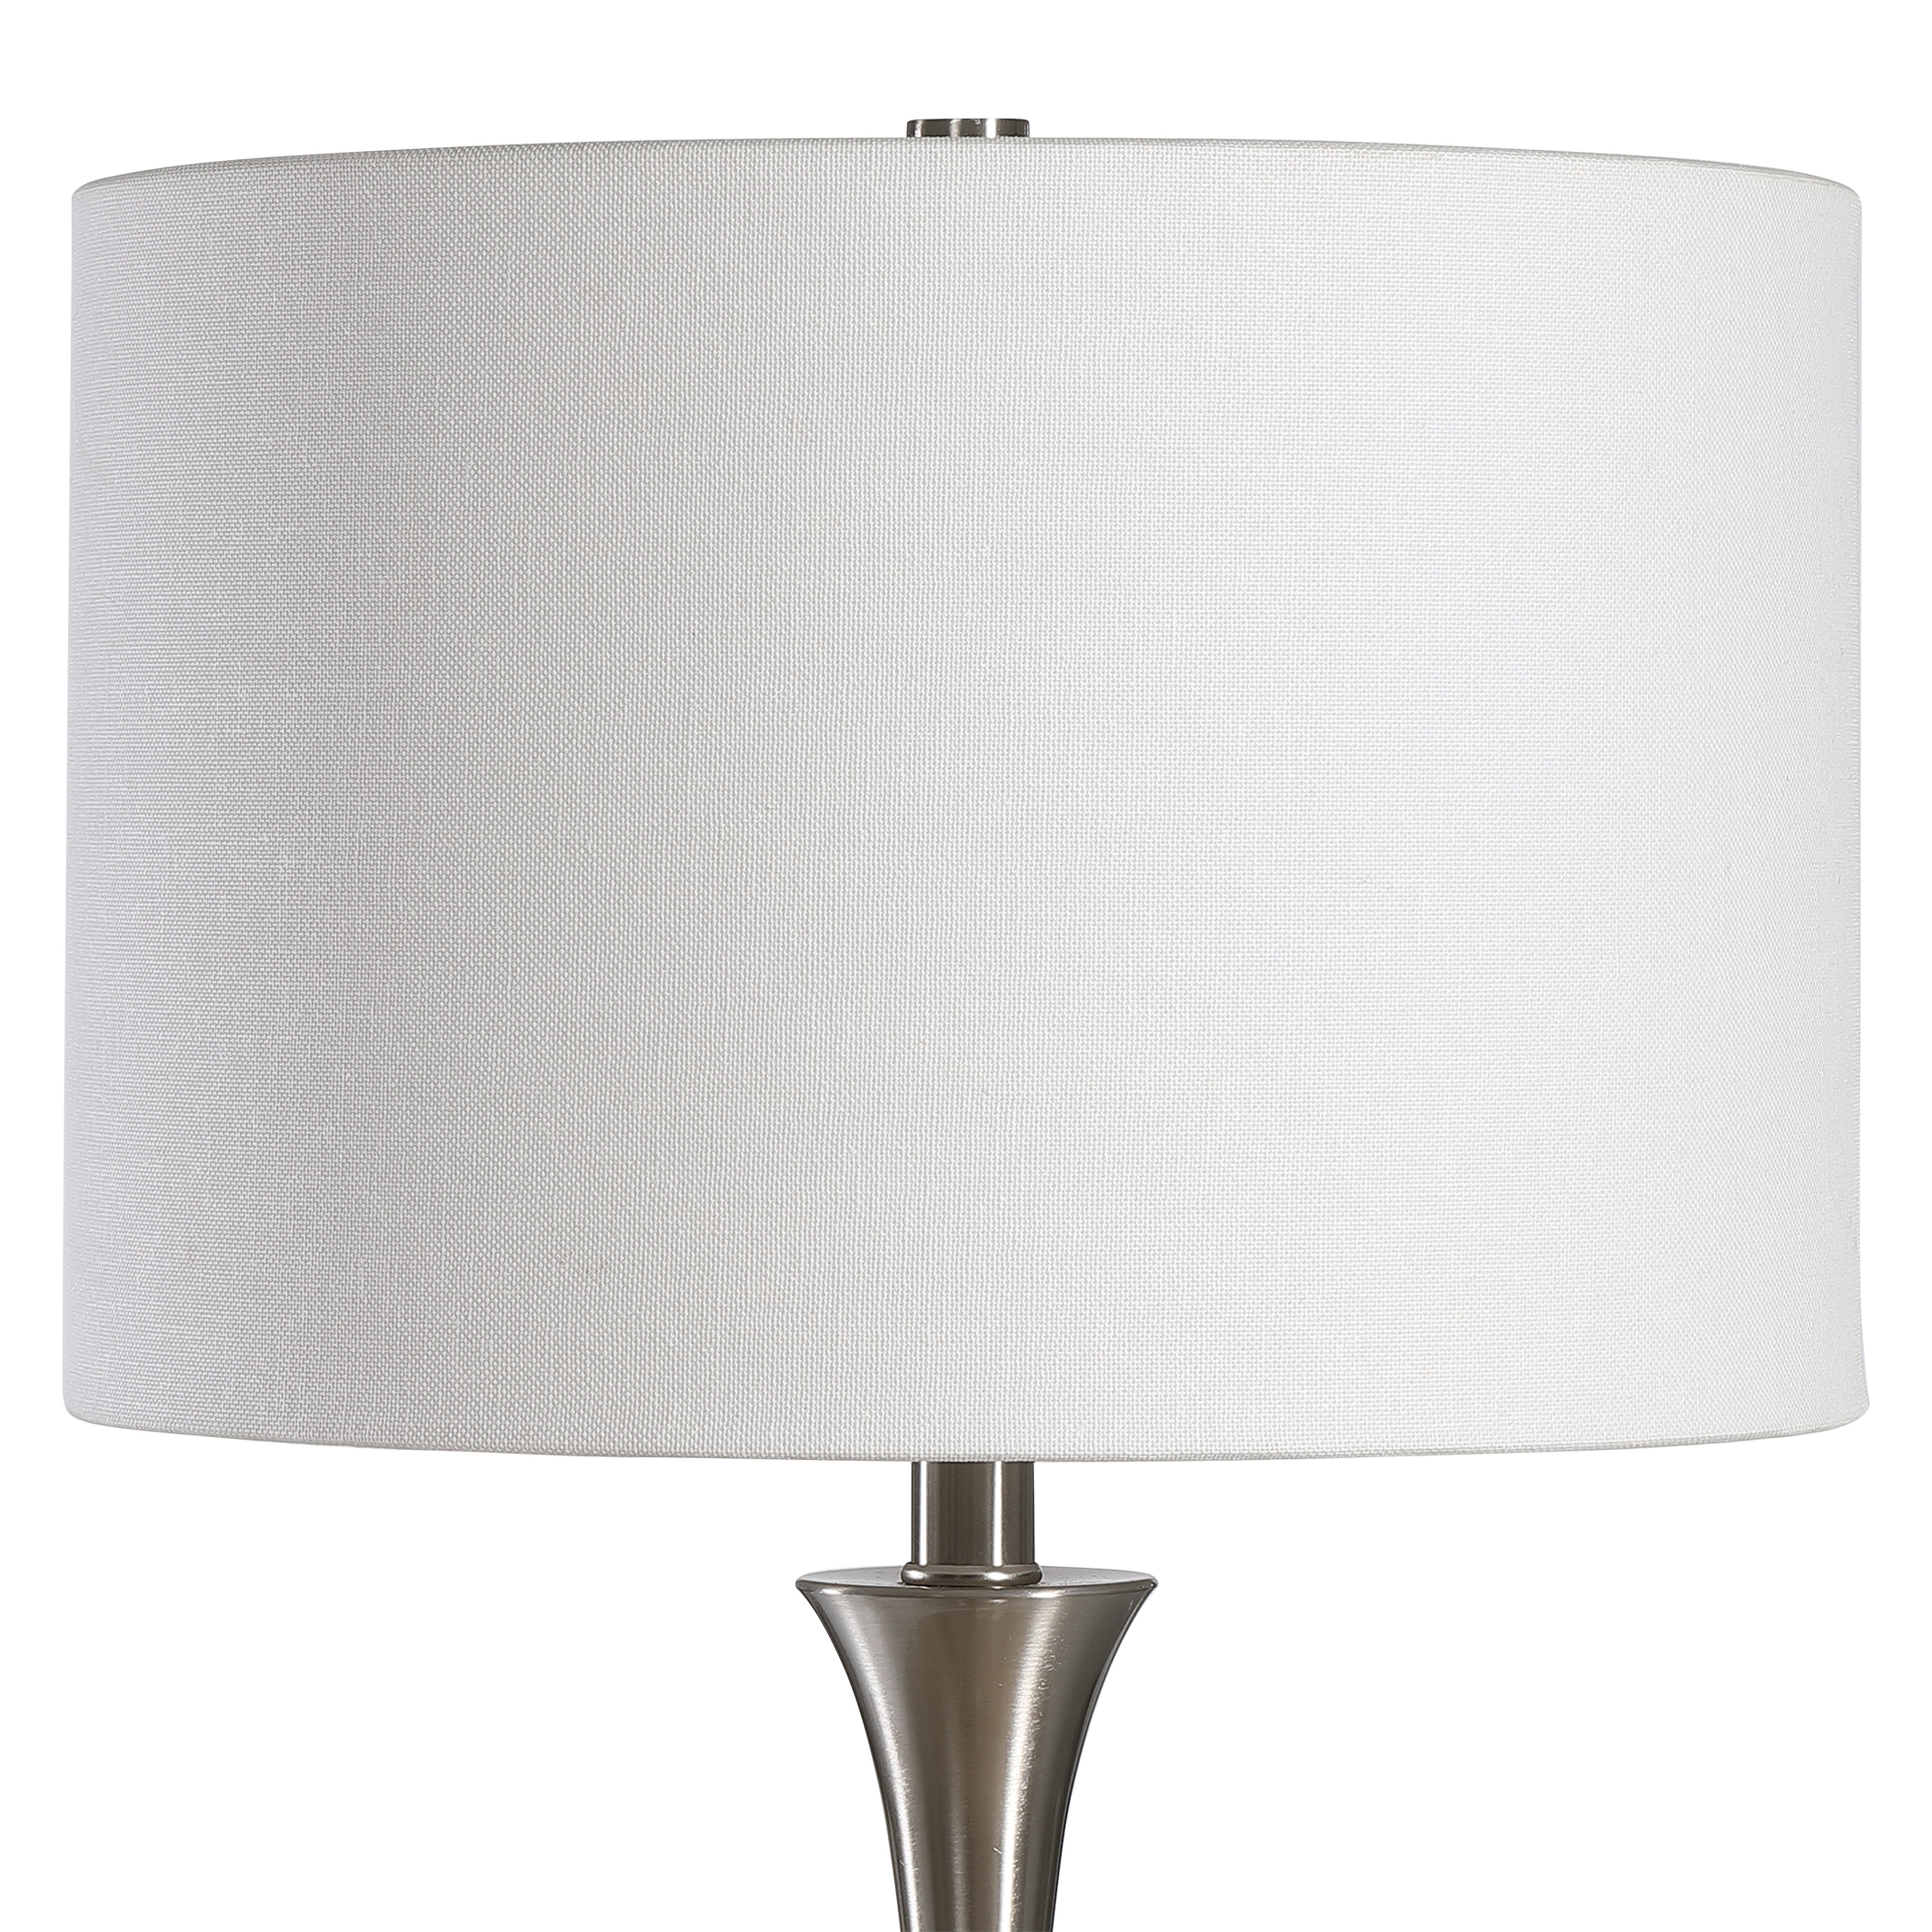 Pitman Industrial Table Lamp - Image 4